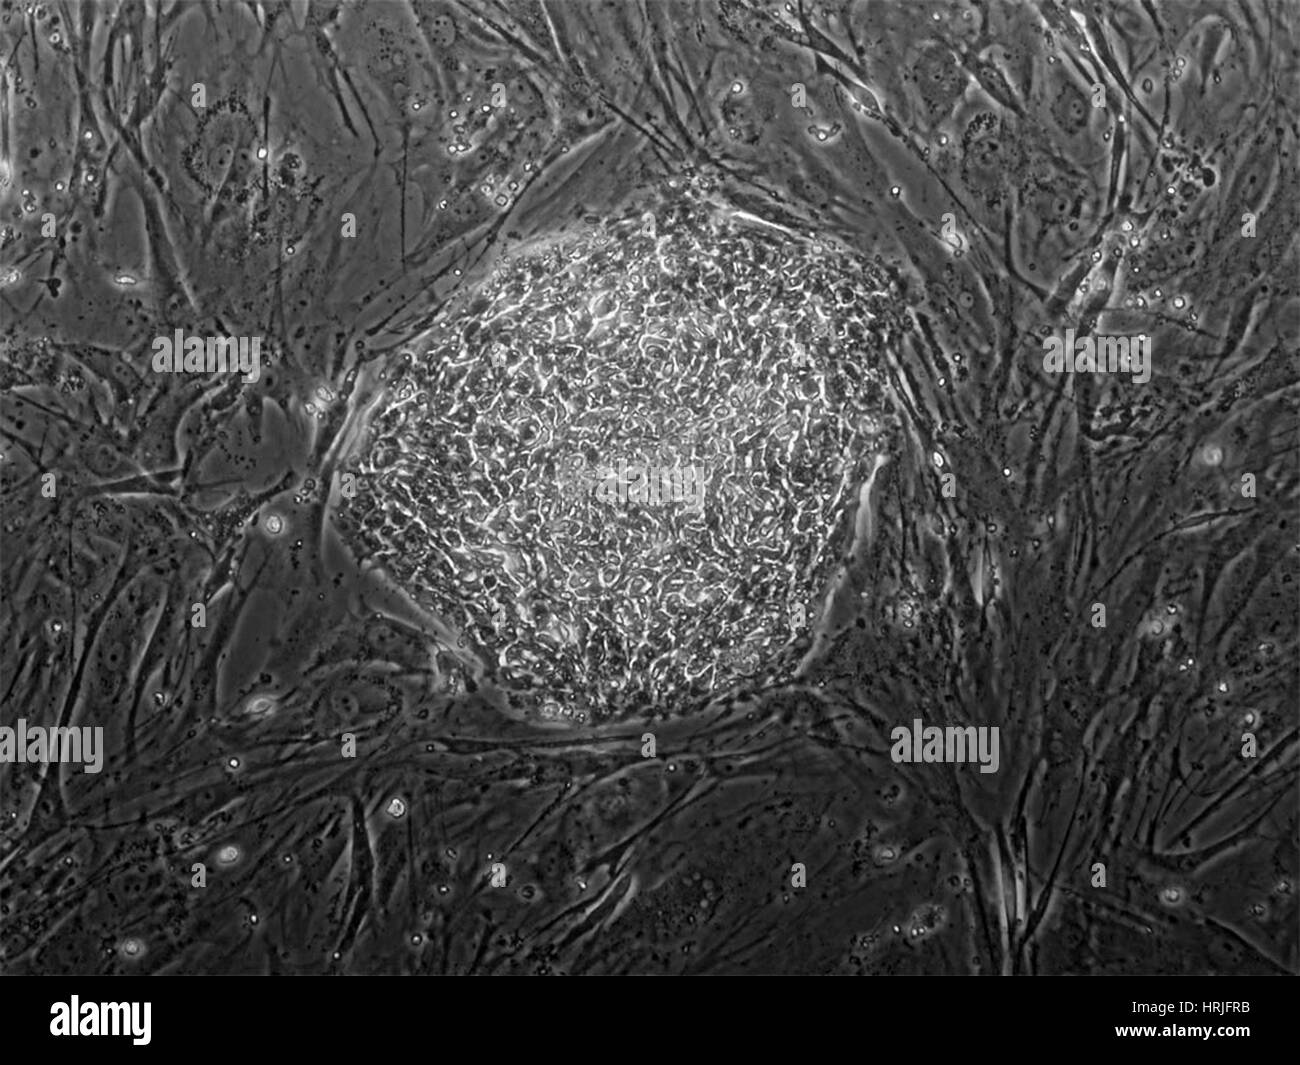 Human Embryonic Stem Cell Line ES01 Stock Photo